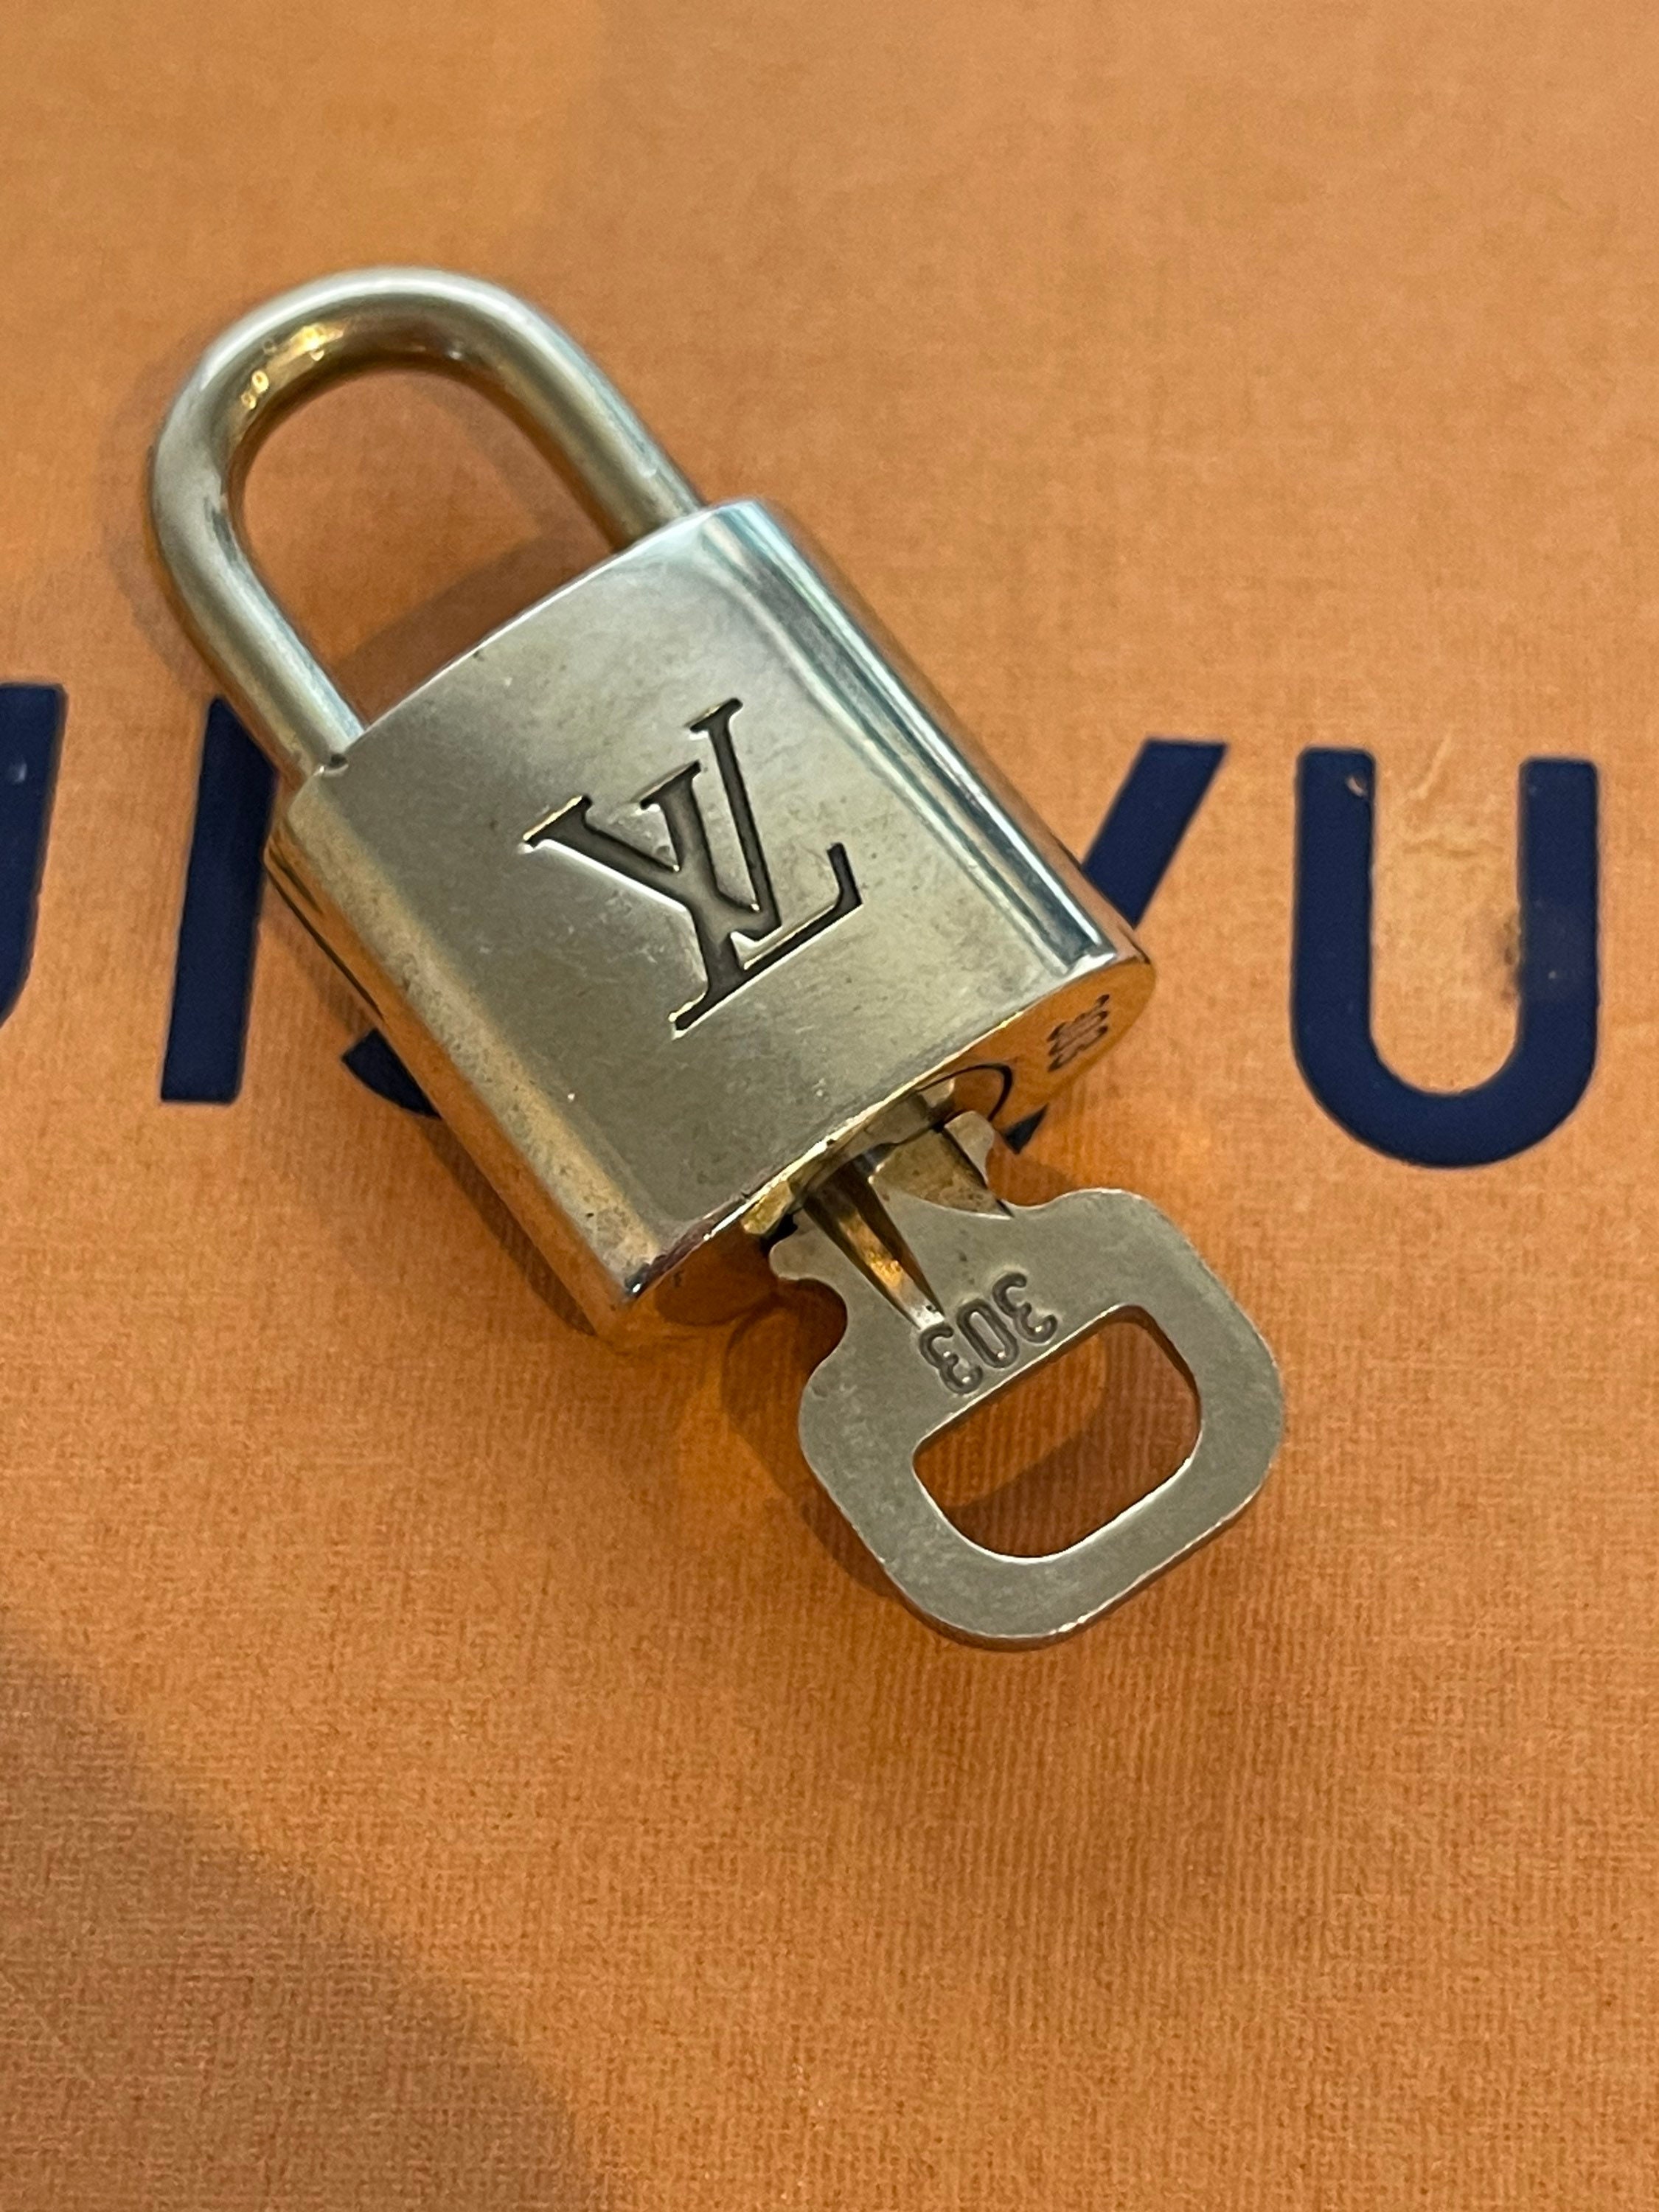 Pinkerly Special Louis Vuitton Padlock and One Key 303 Lock 